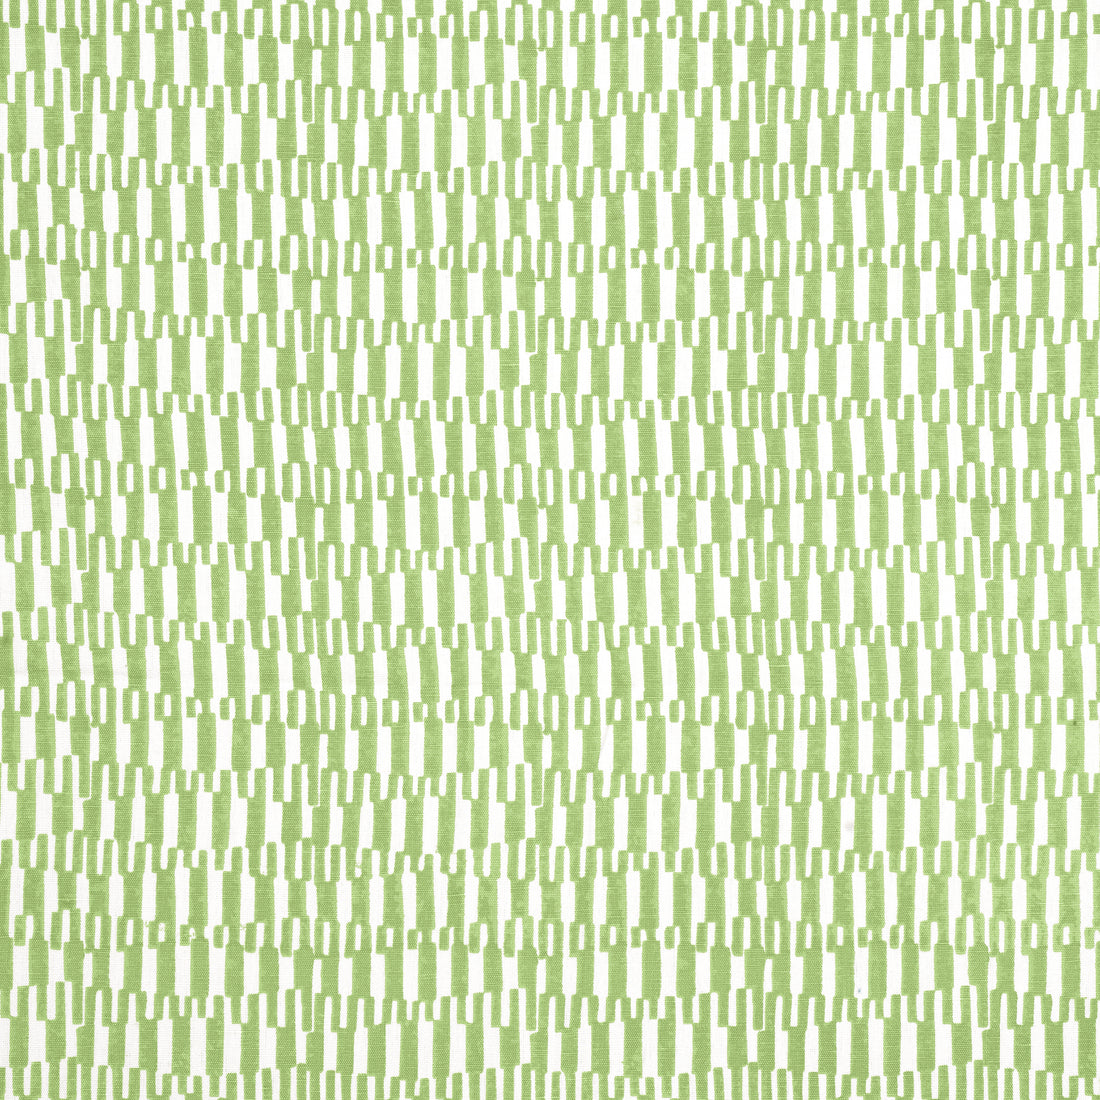 Gogo fabric in parrot green color - pattern number F920800 - by Thibaut in the Eden collection